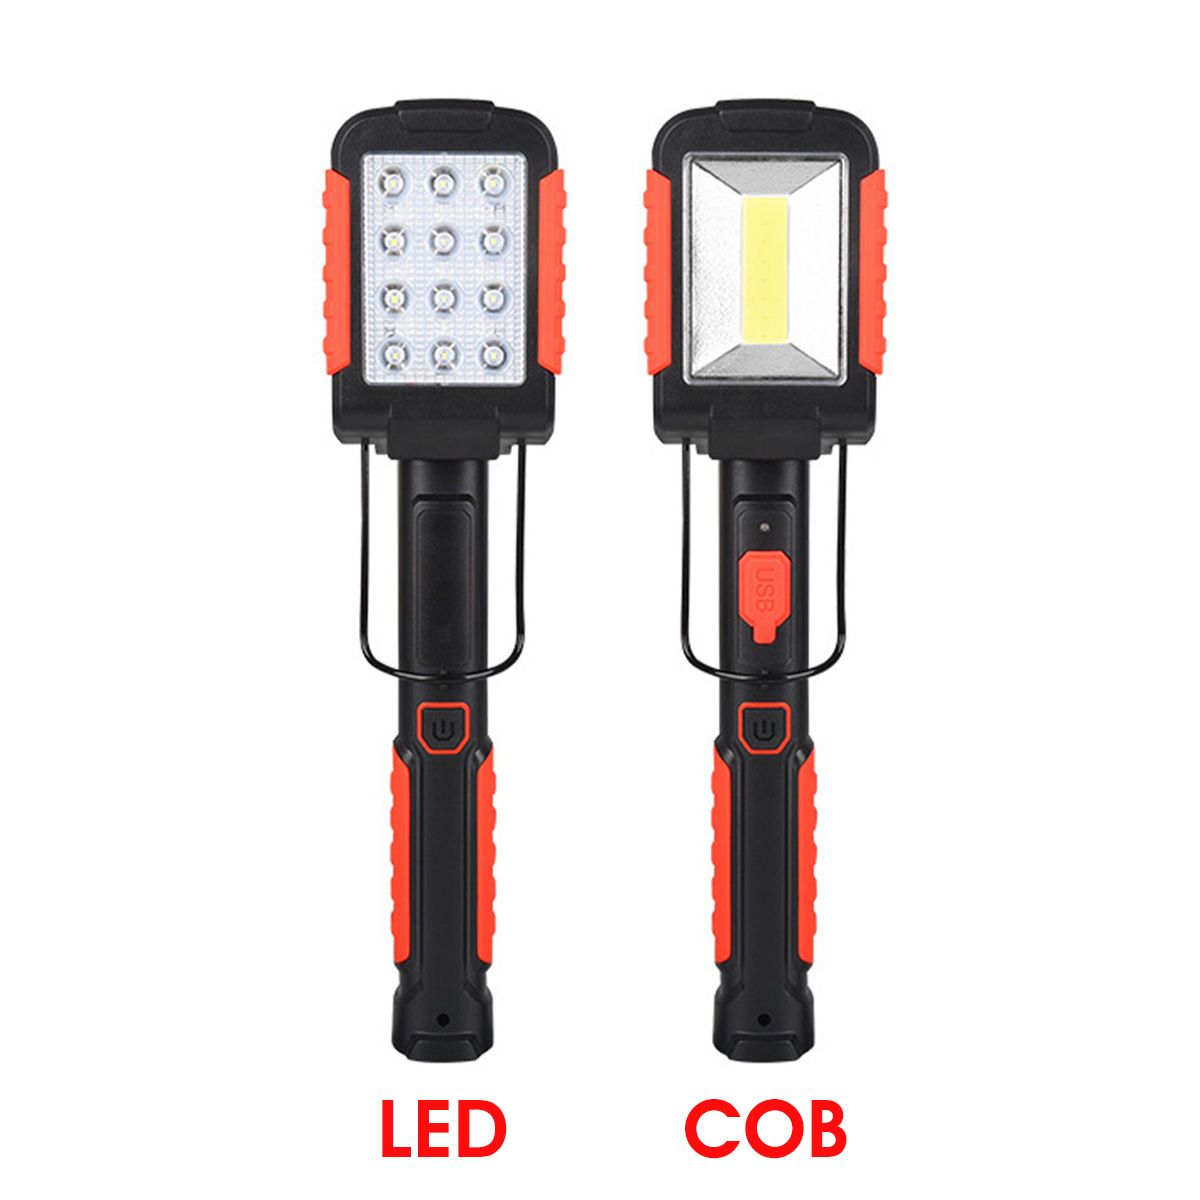 COBLED-Work-Light-USB-ChargingBattery-Type-With-Magnet-Base-for-Car-Maintenance-Outdoor-Camping-1657282